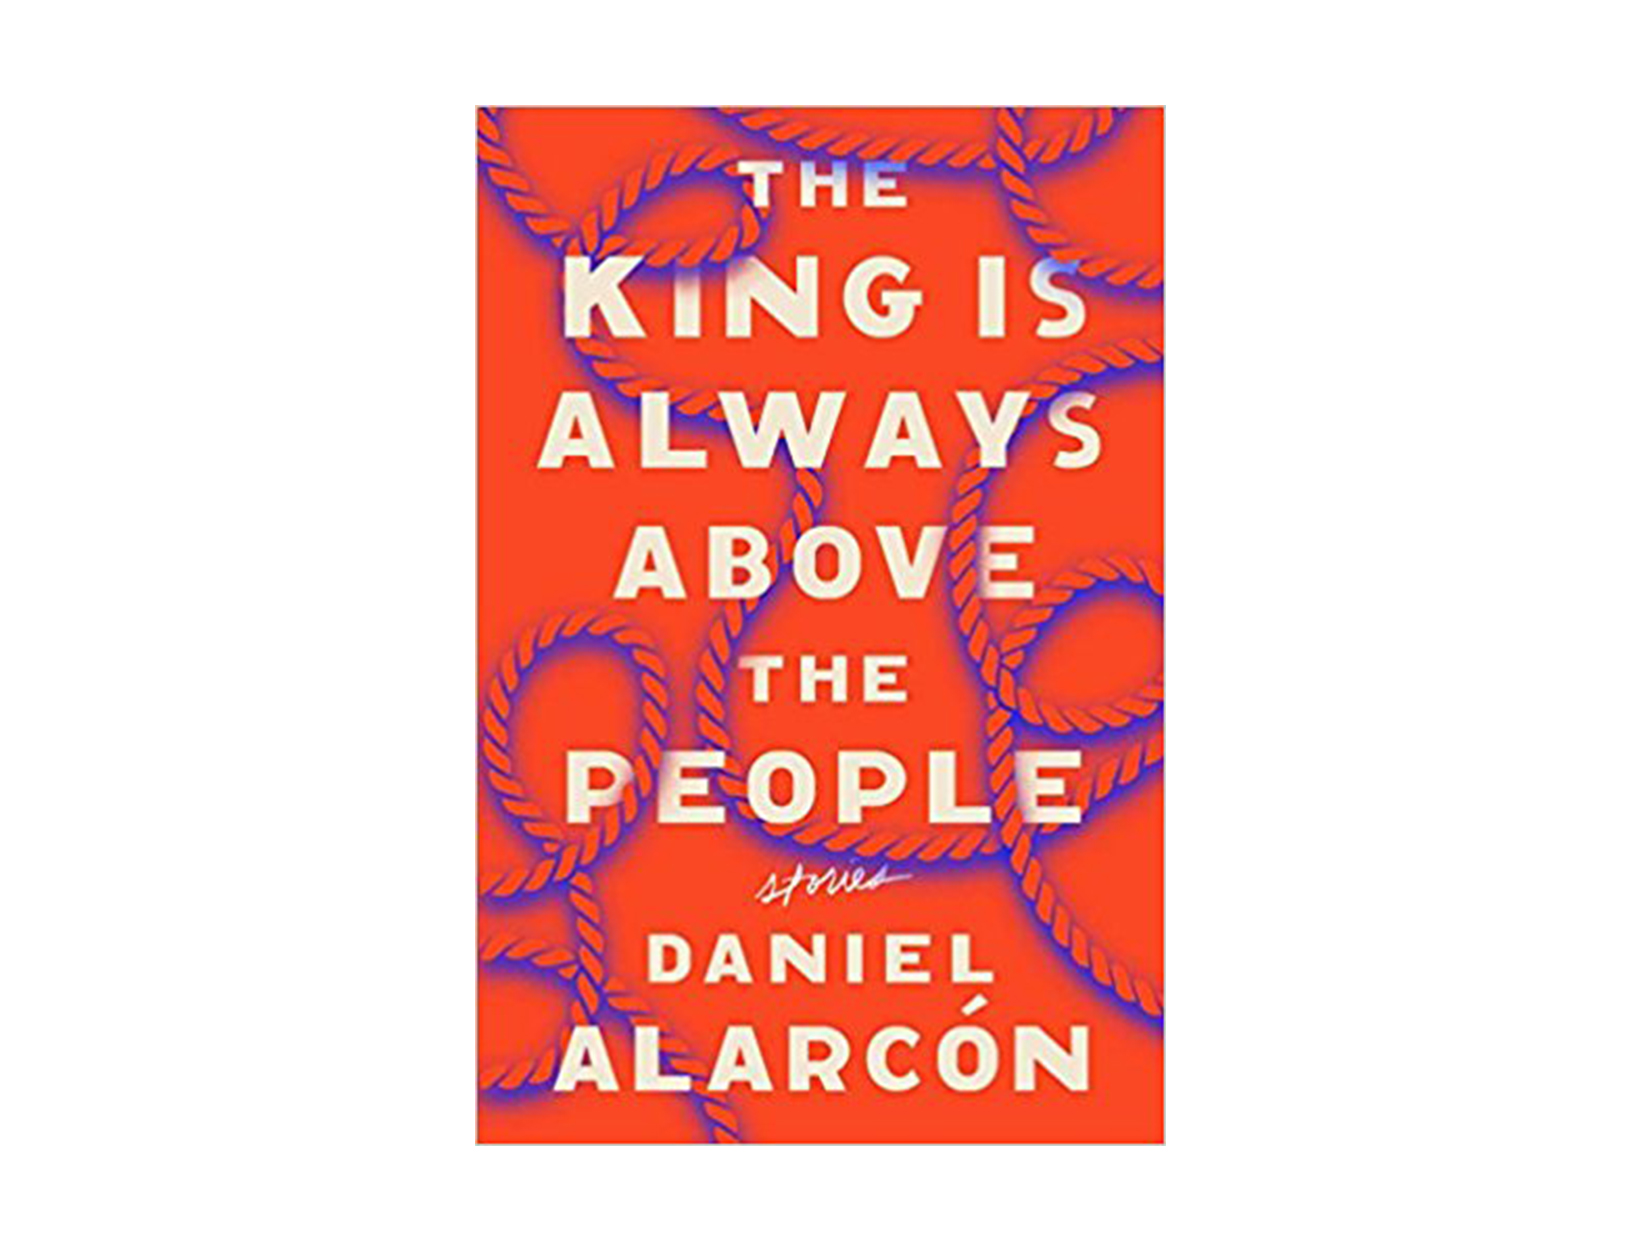 The King Is Always Above the People by Daniel Alarcón